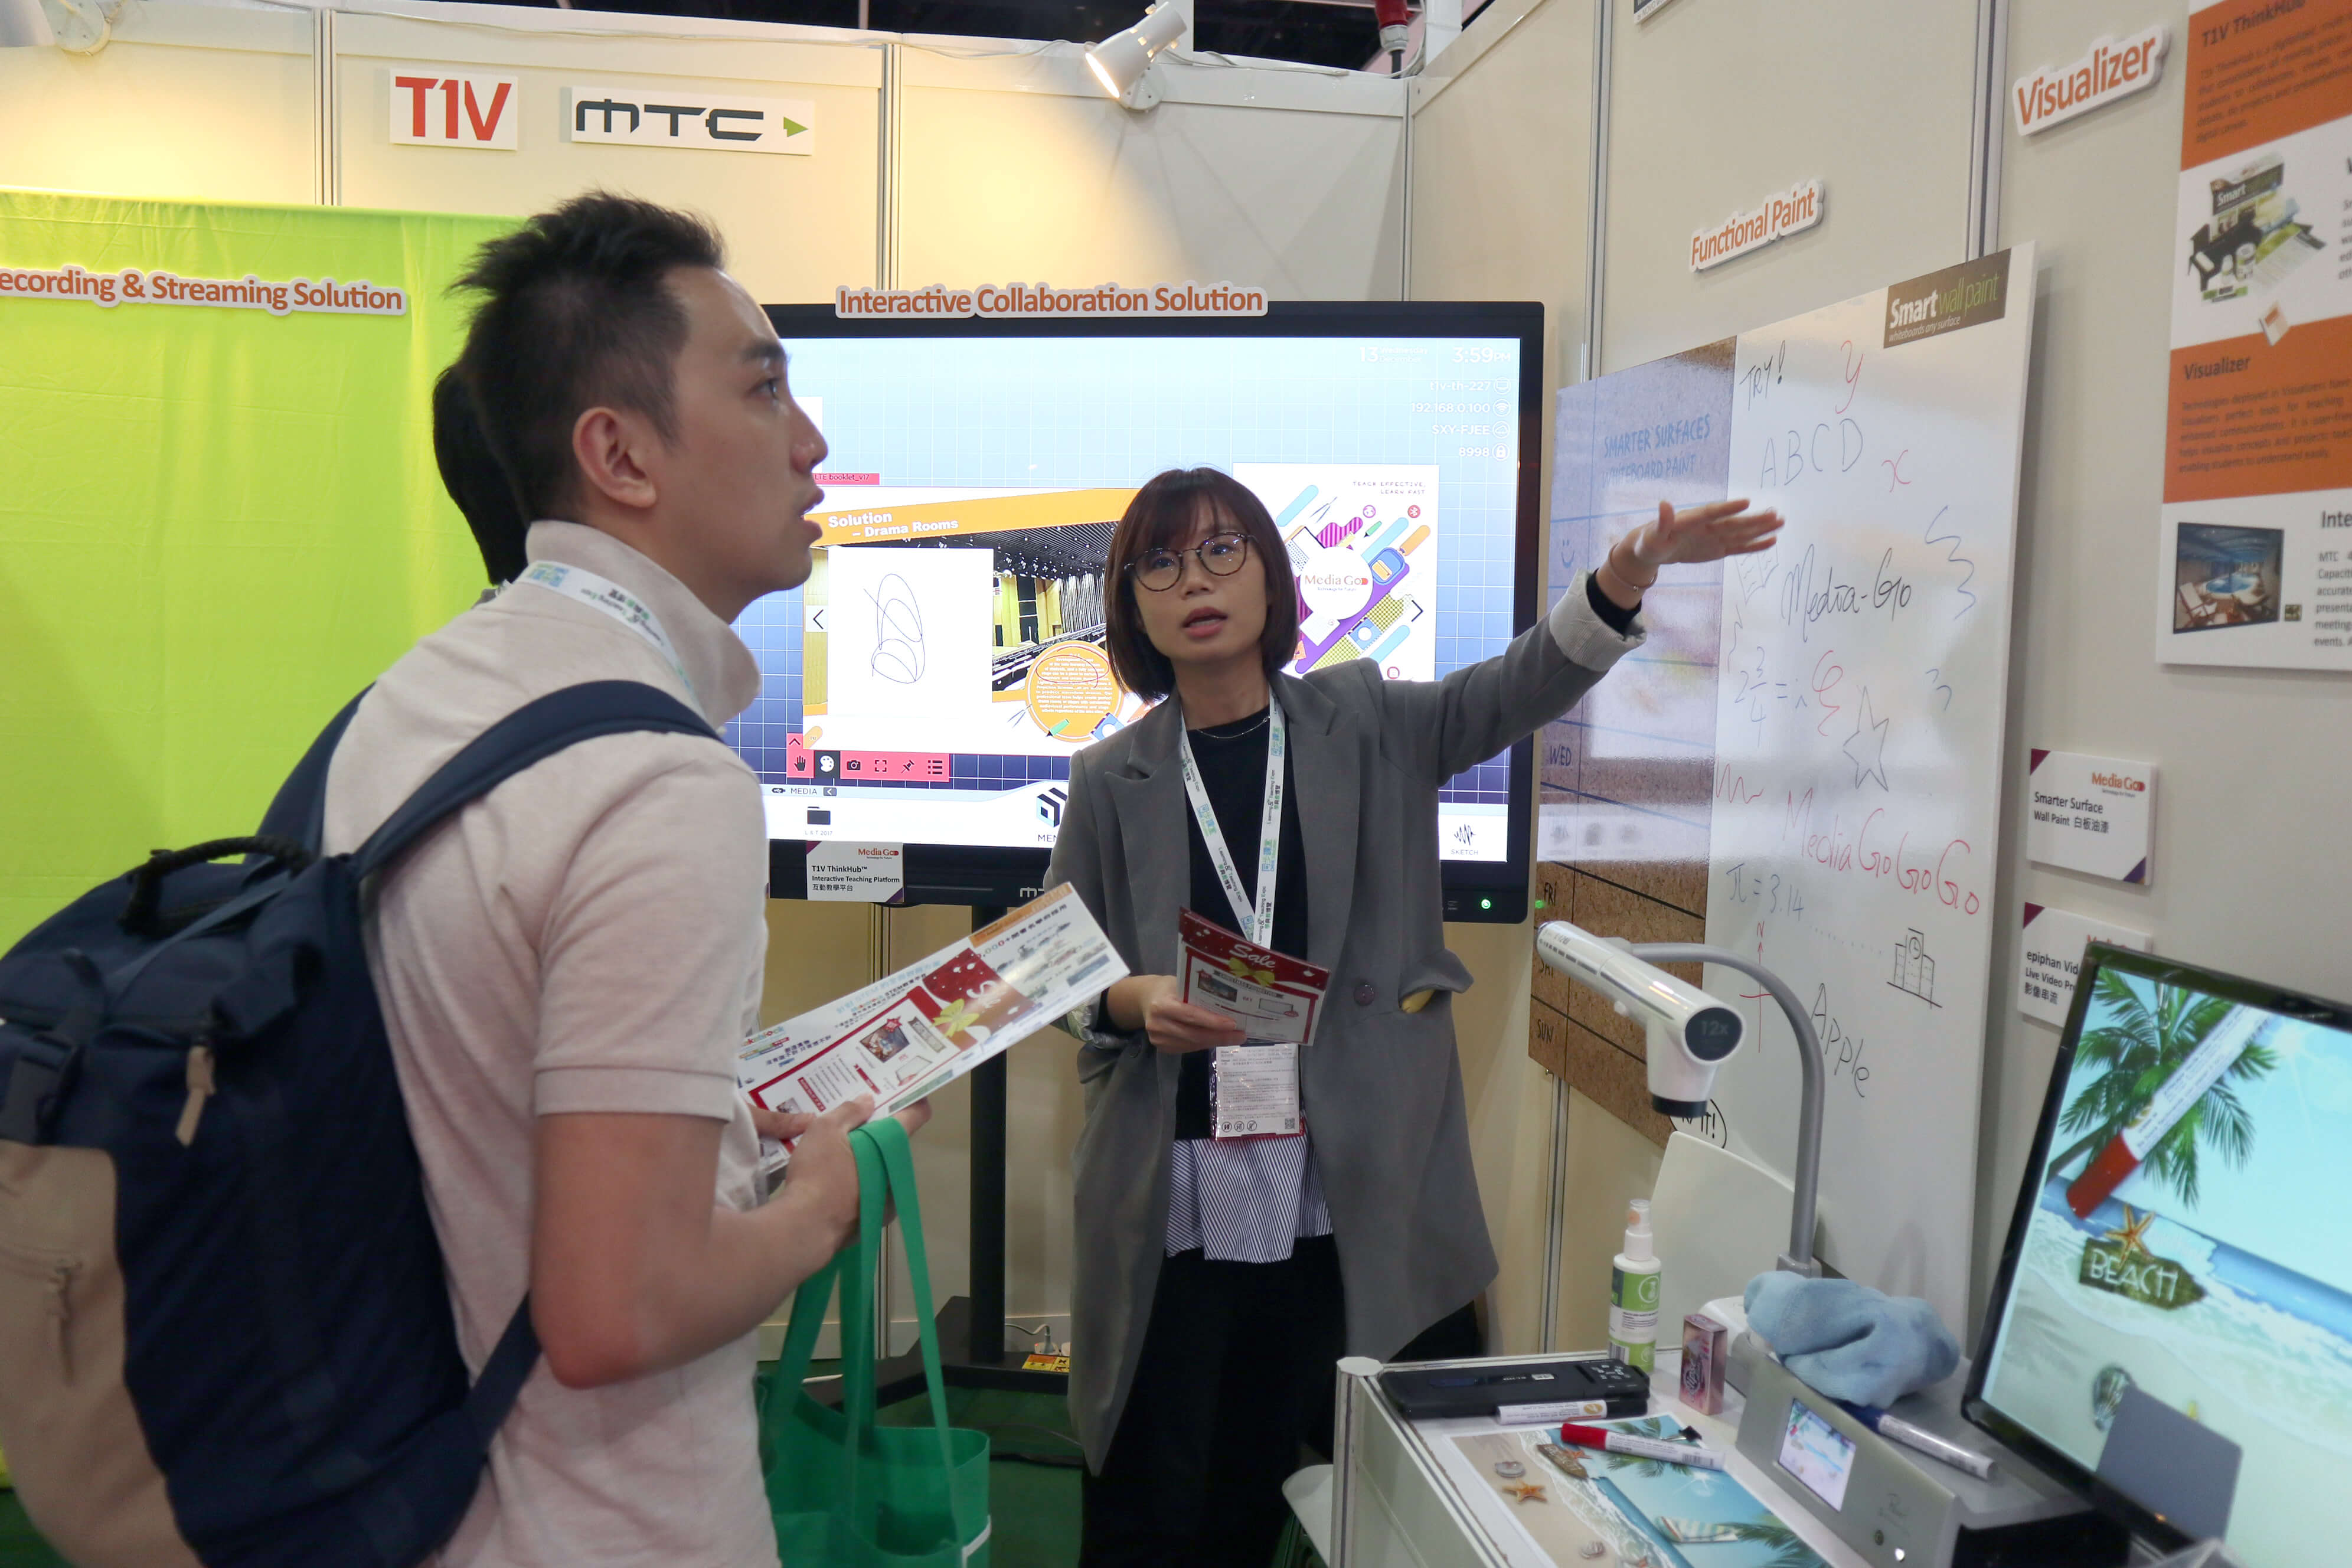 LTE1 Media Go Facilitates Effective Teaching, Fast Learning With Its Education Solutions